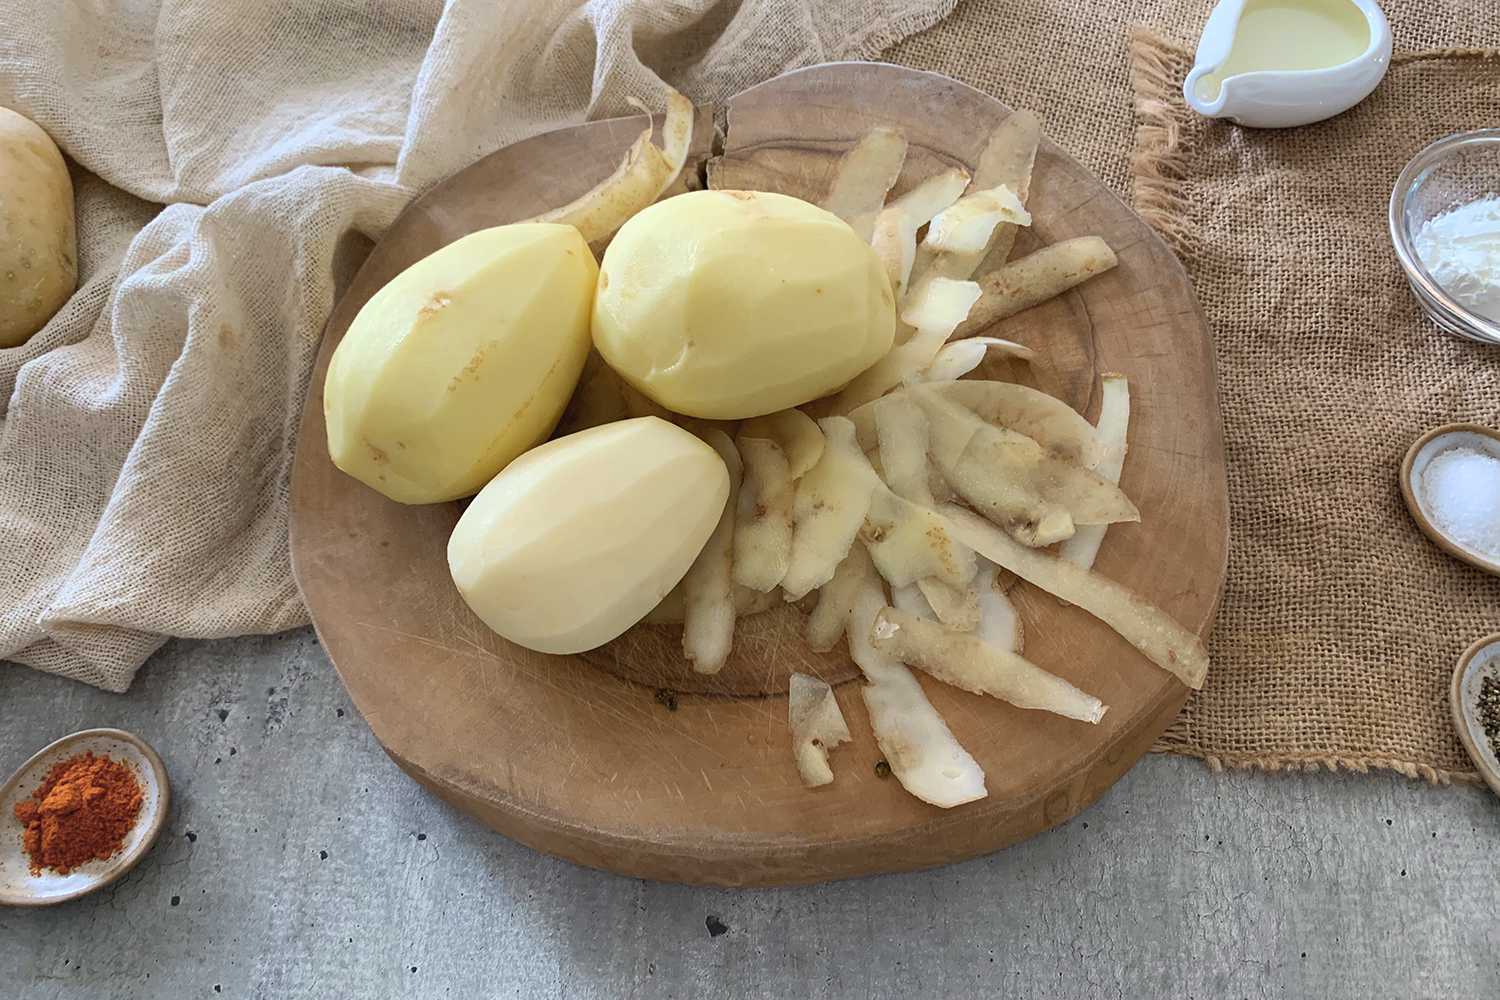 peeled potatoes on a wooden board